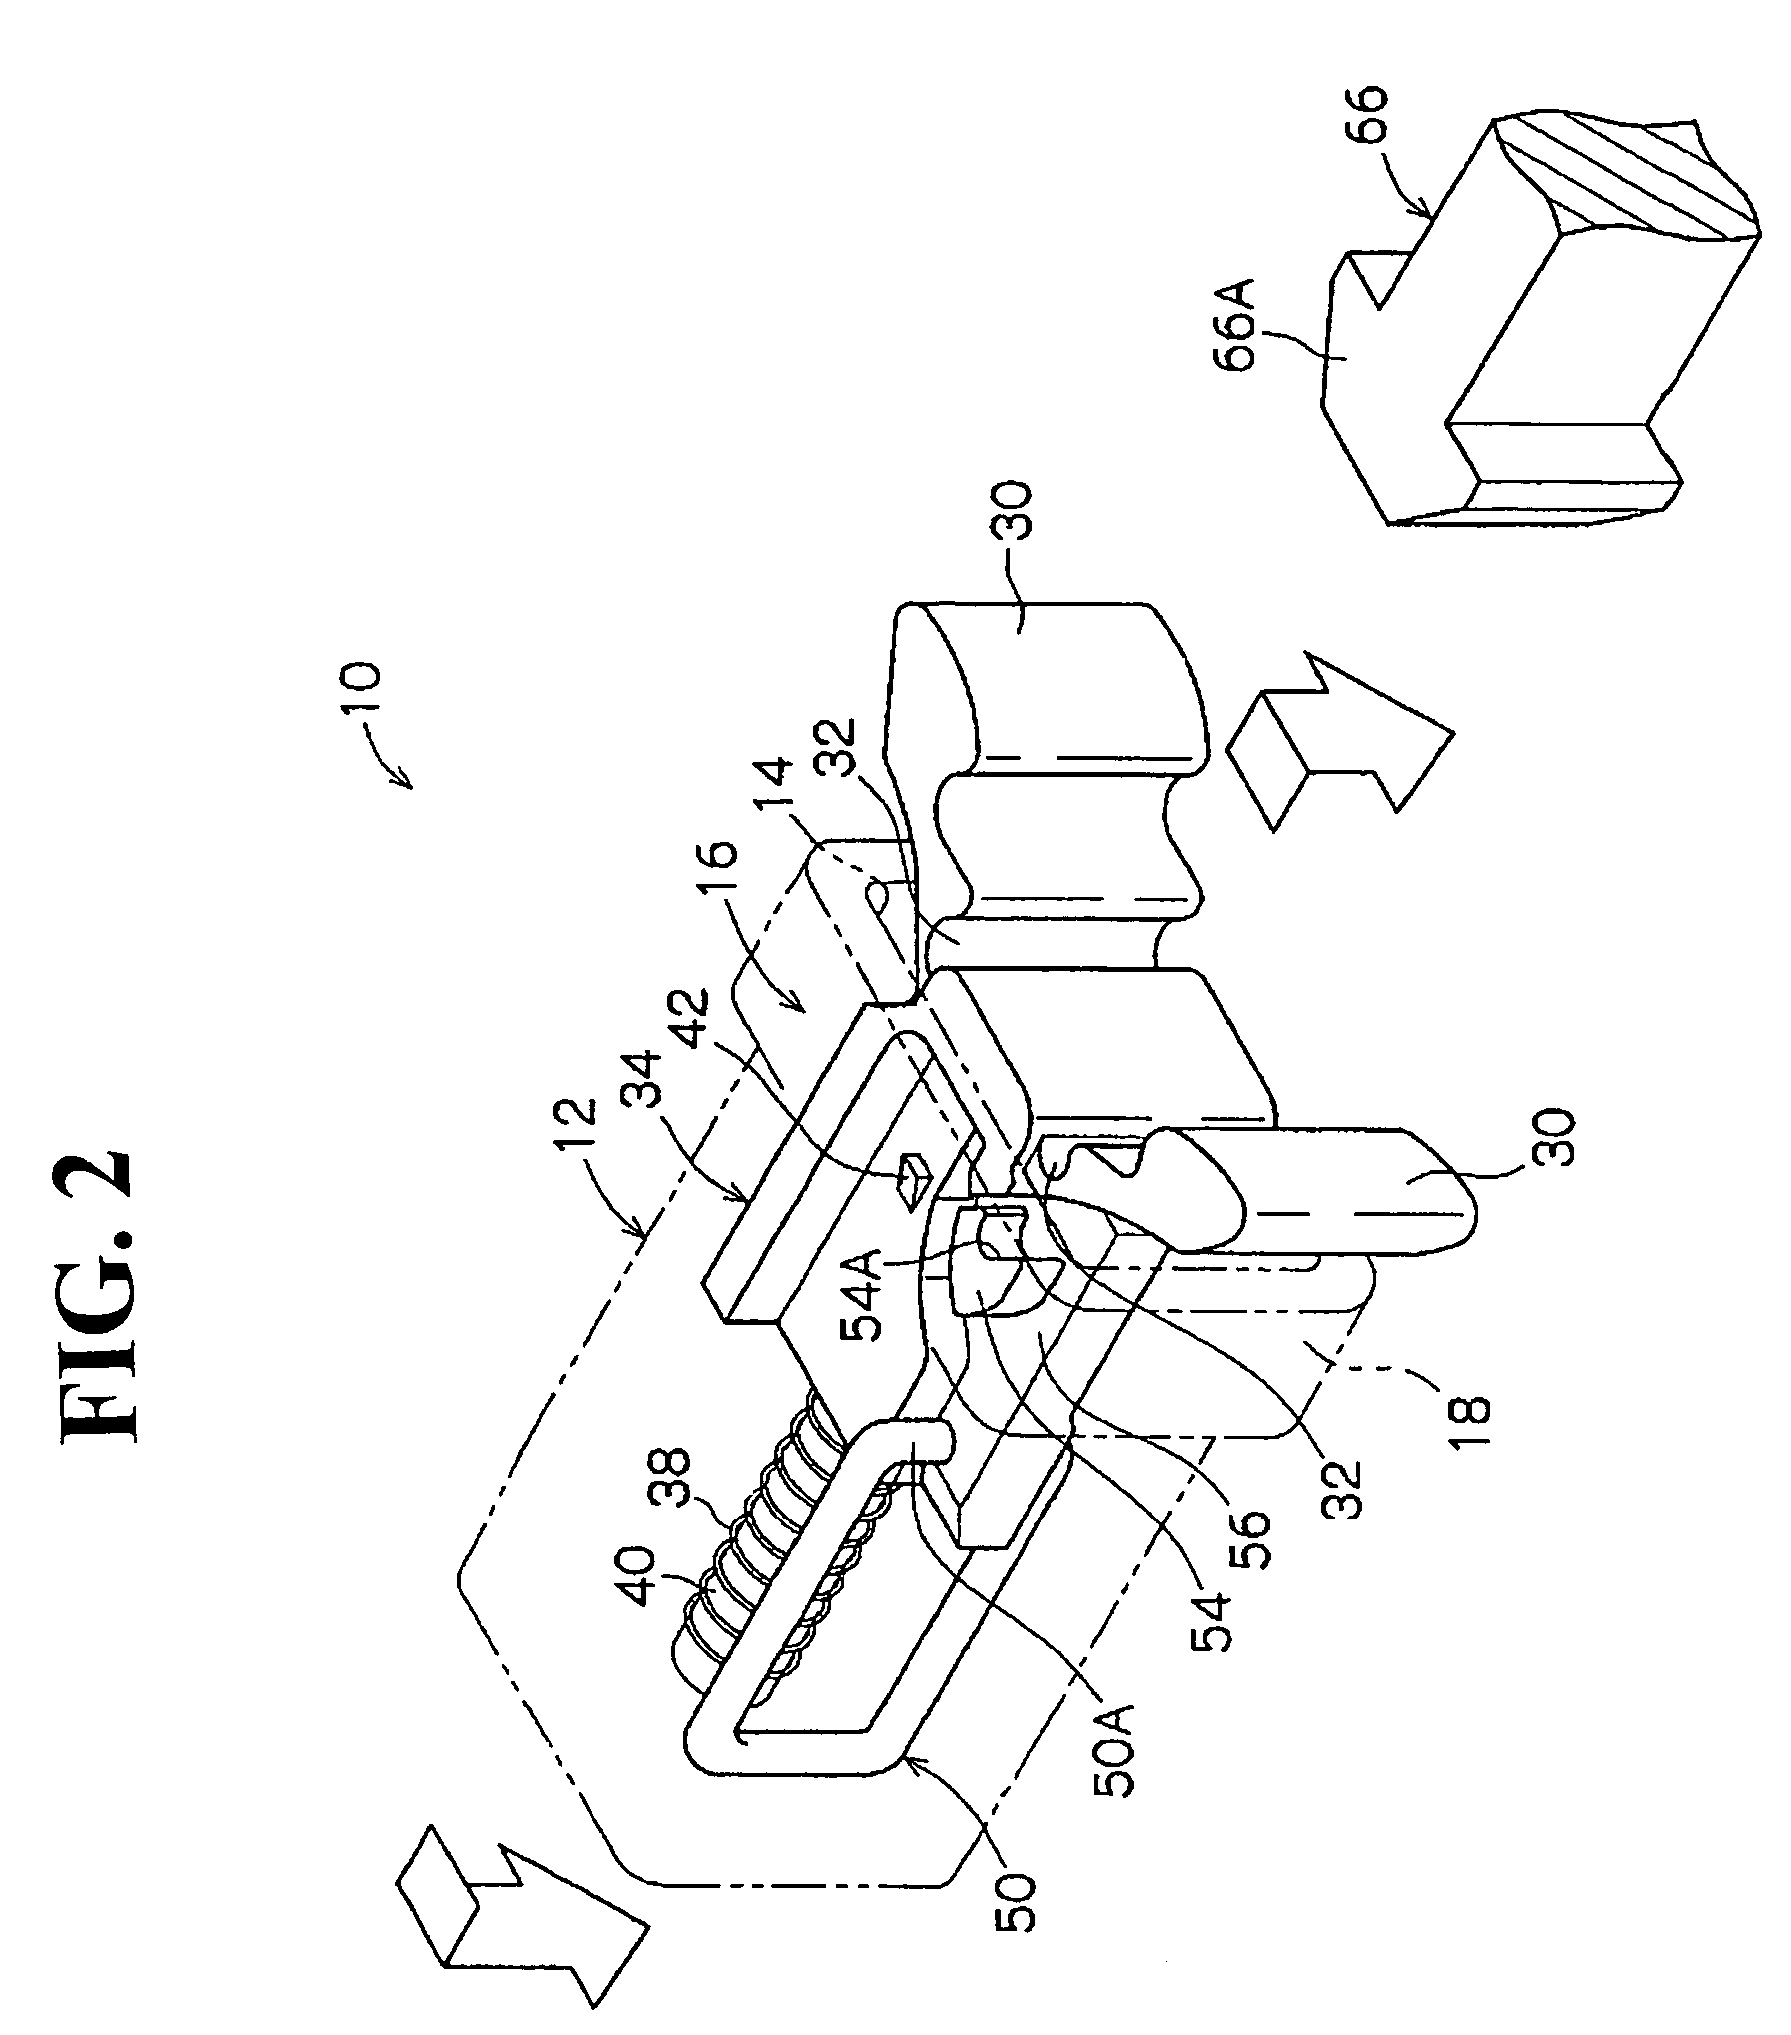 Lock mechanism and latch device